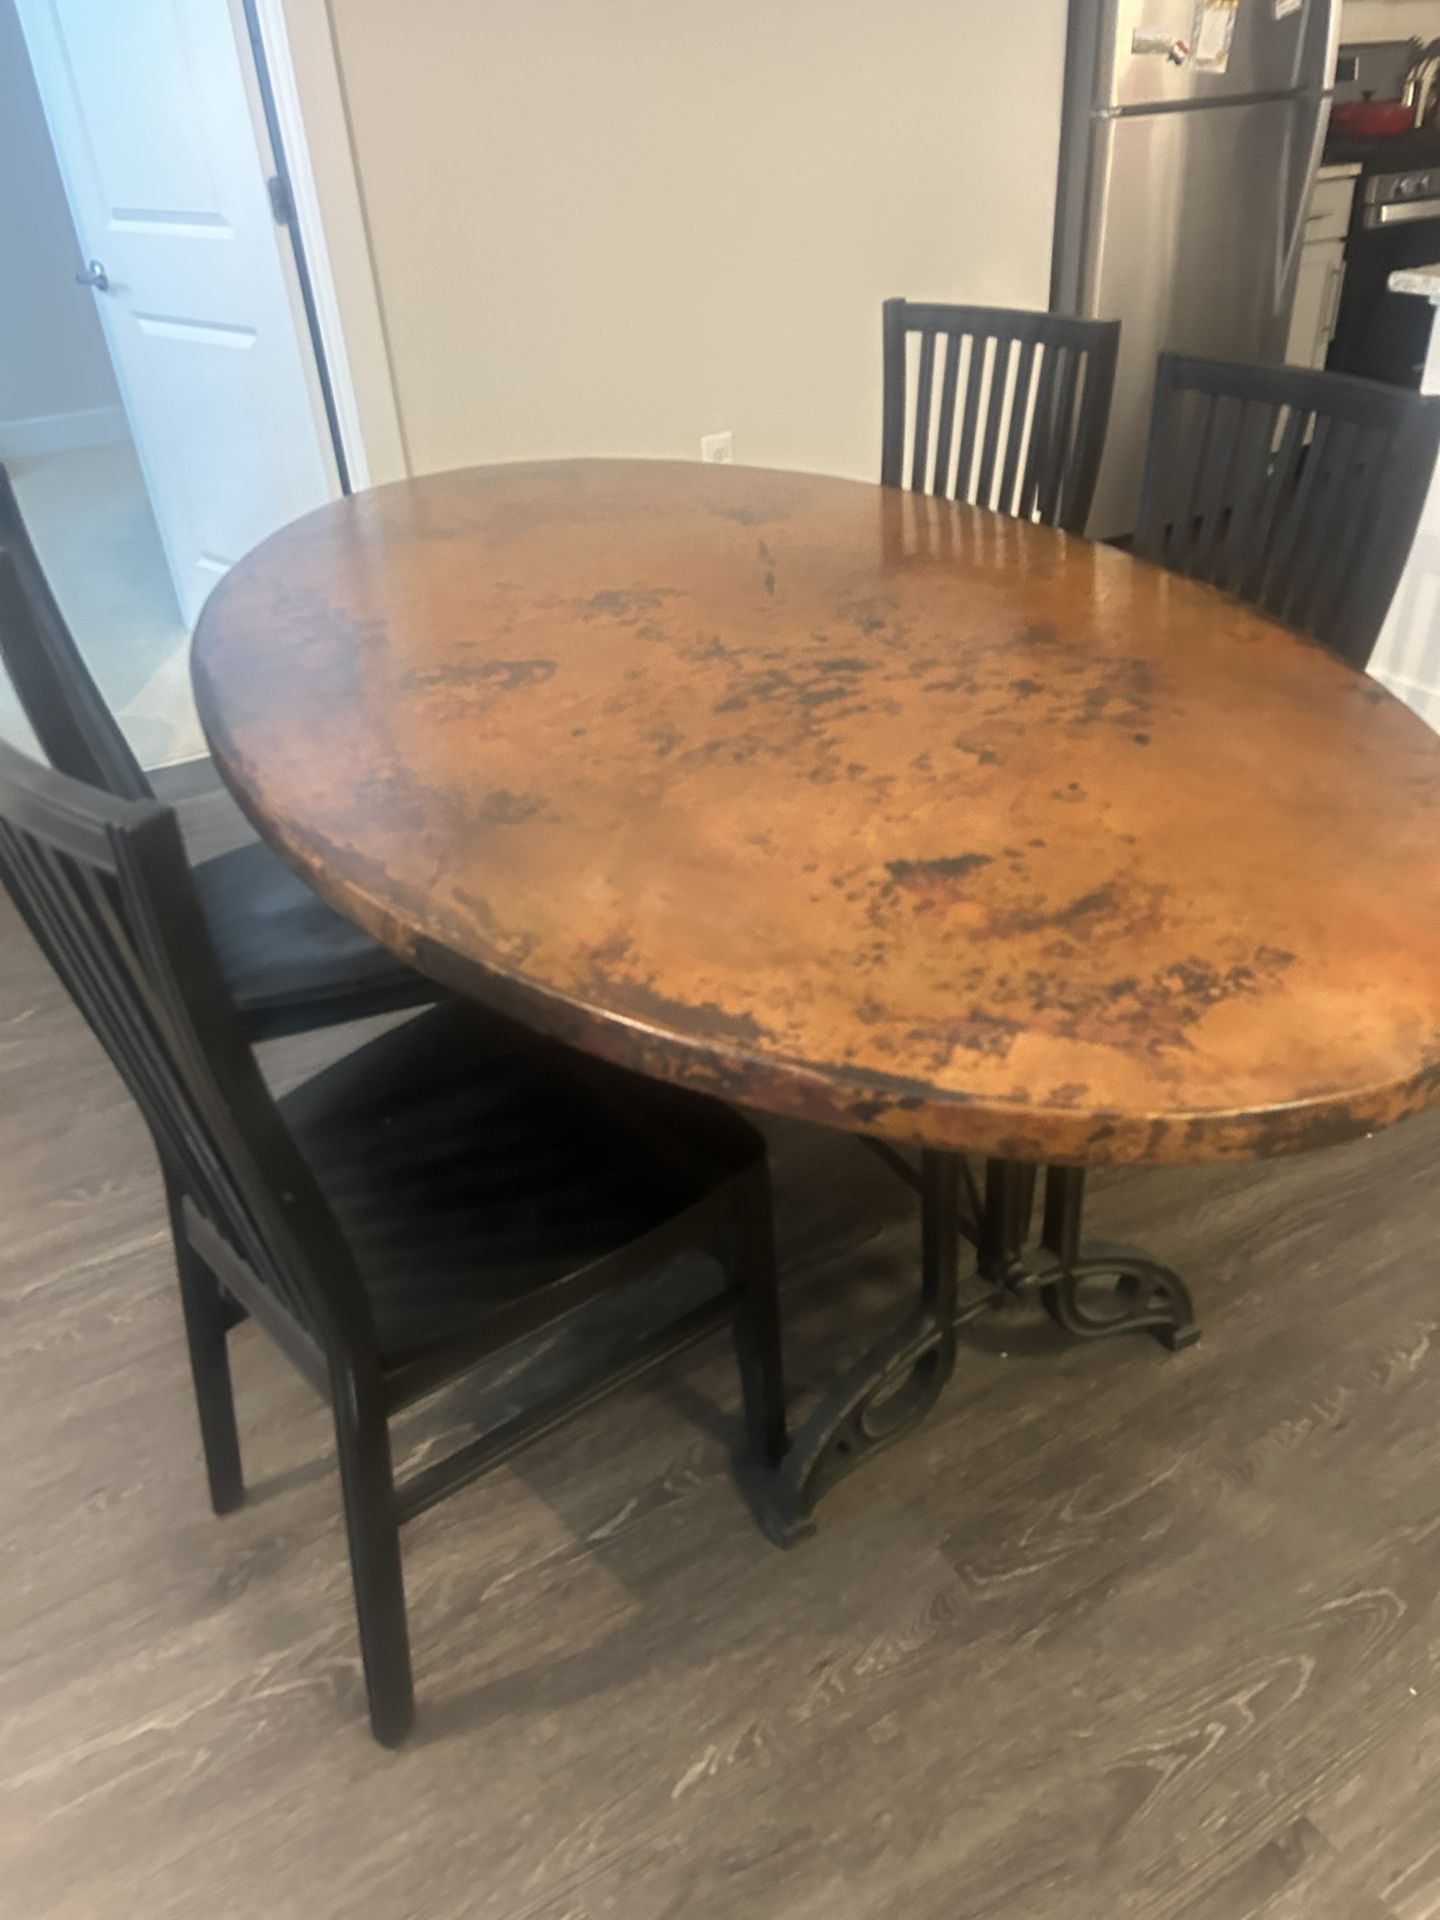   Oval Copper Dinning Table W/ Chairs